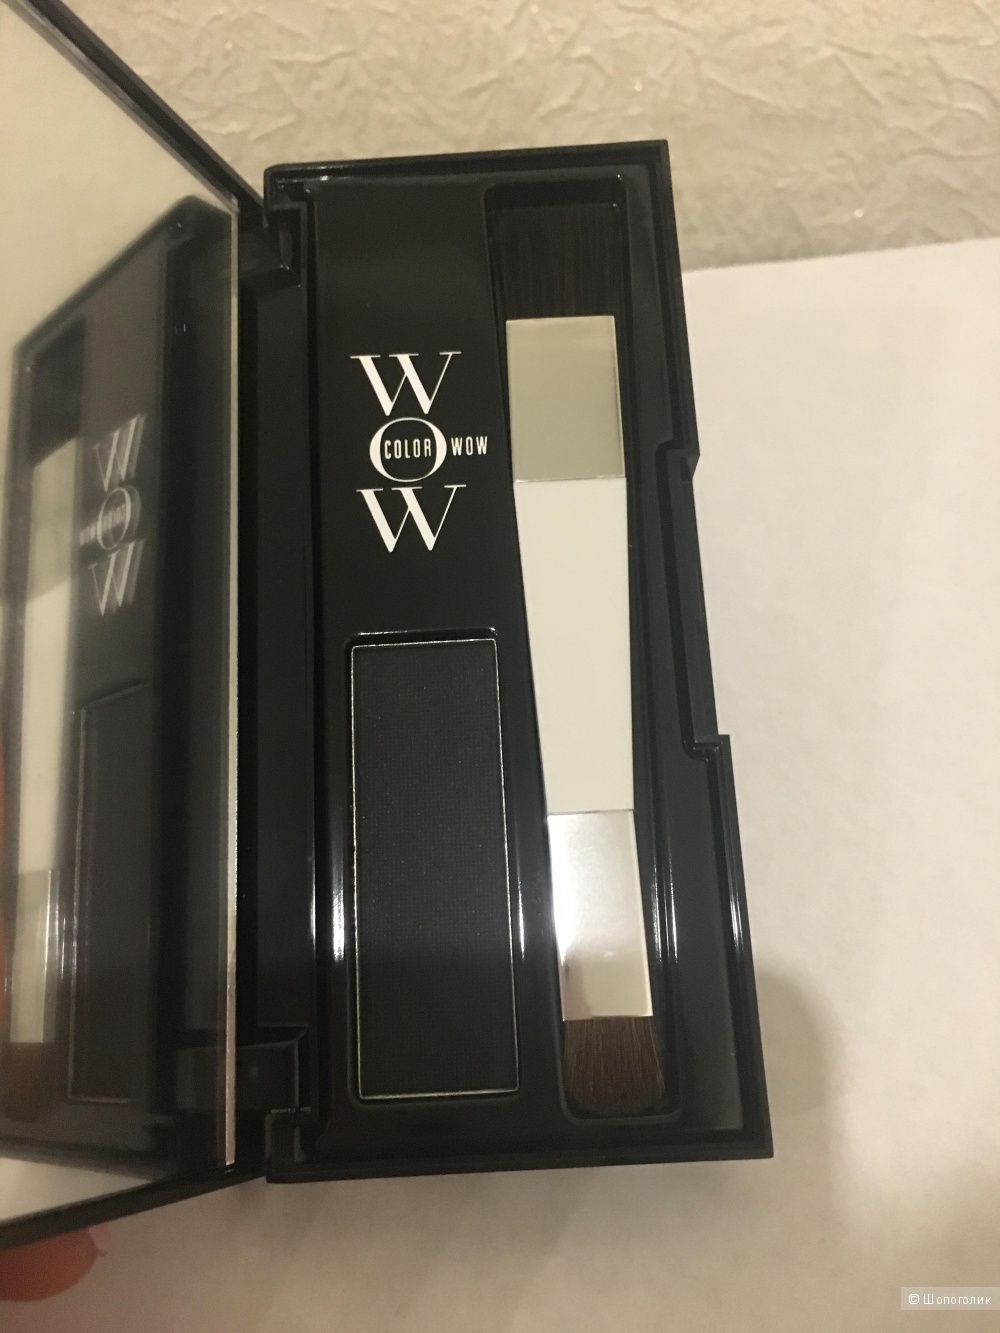 Color Wow root cover up 2,1g